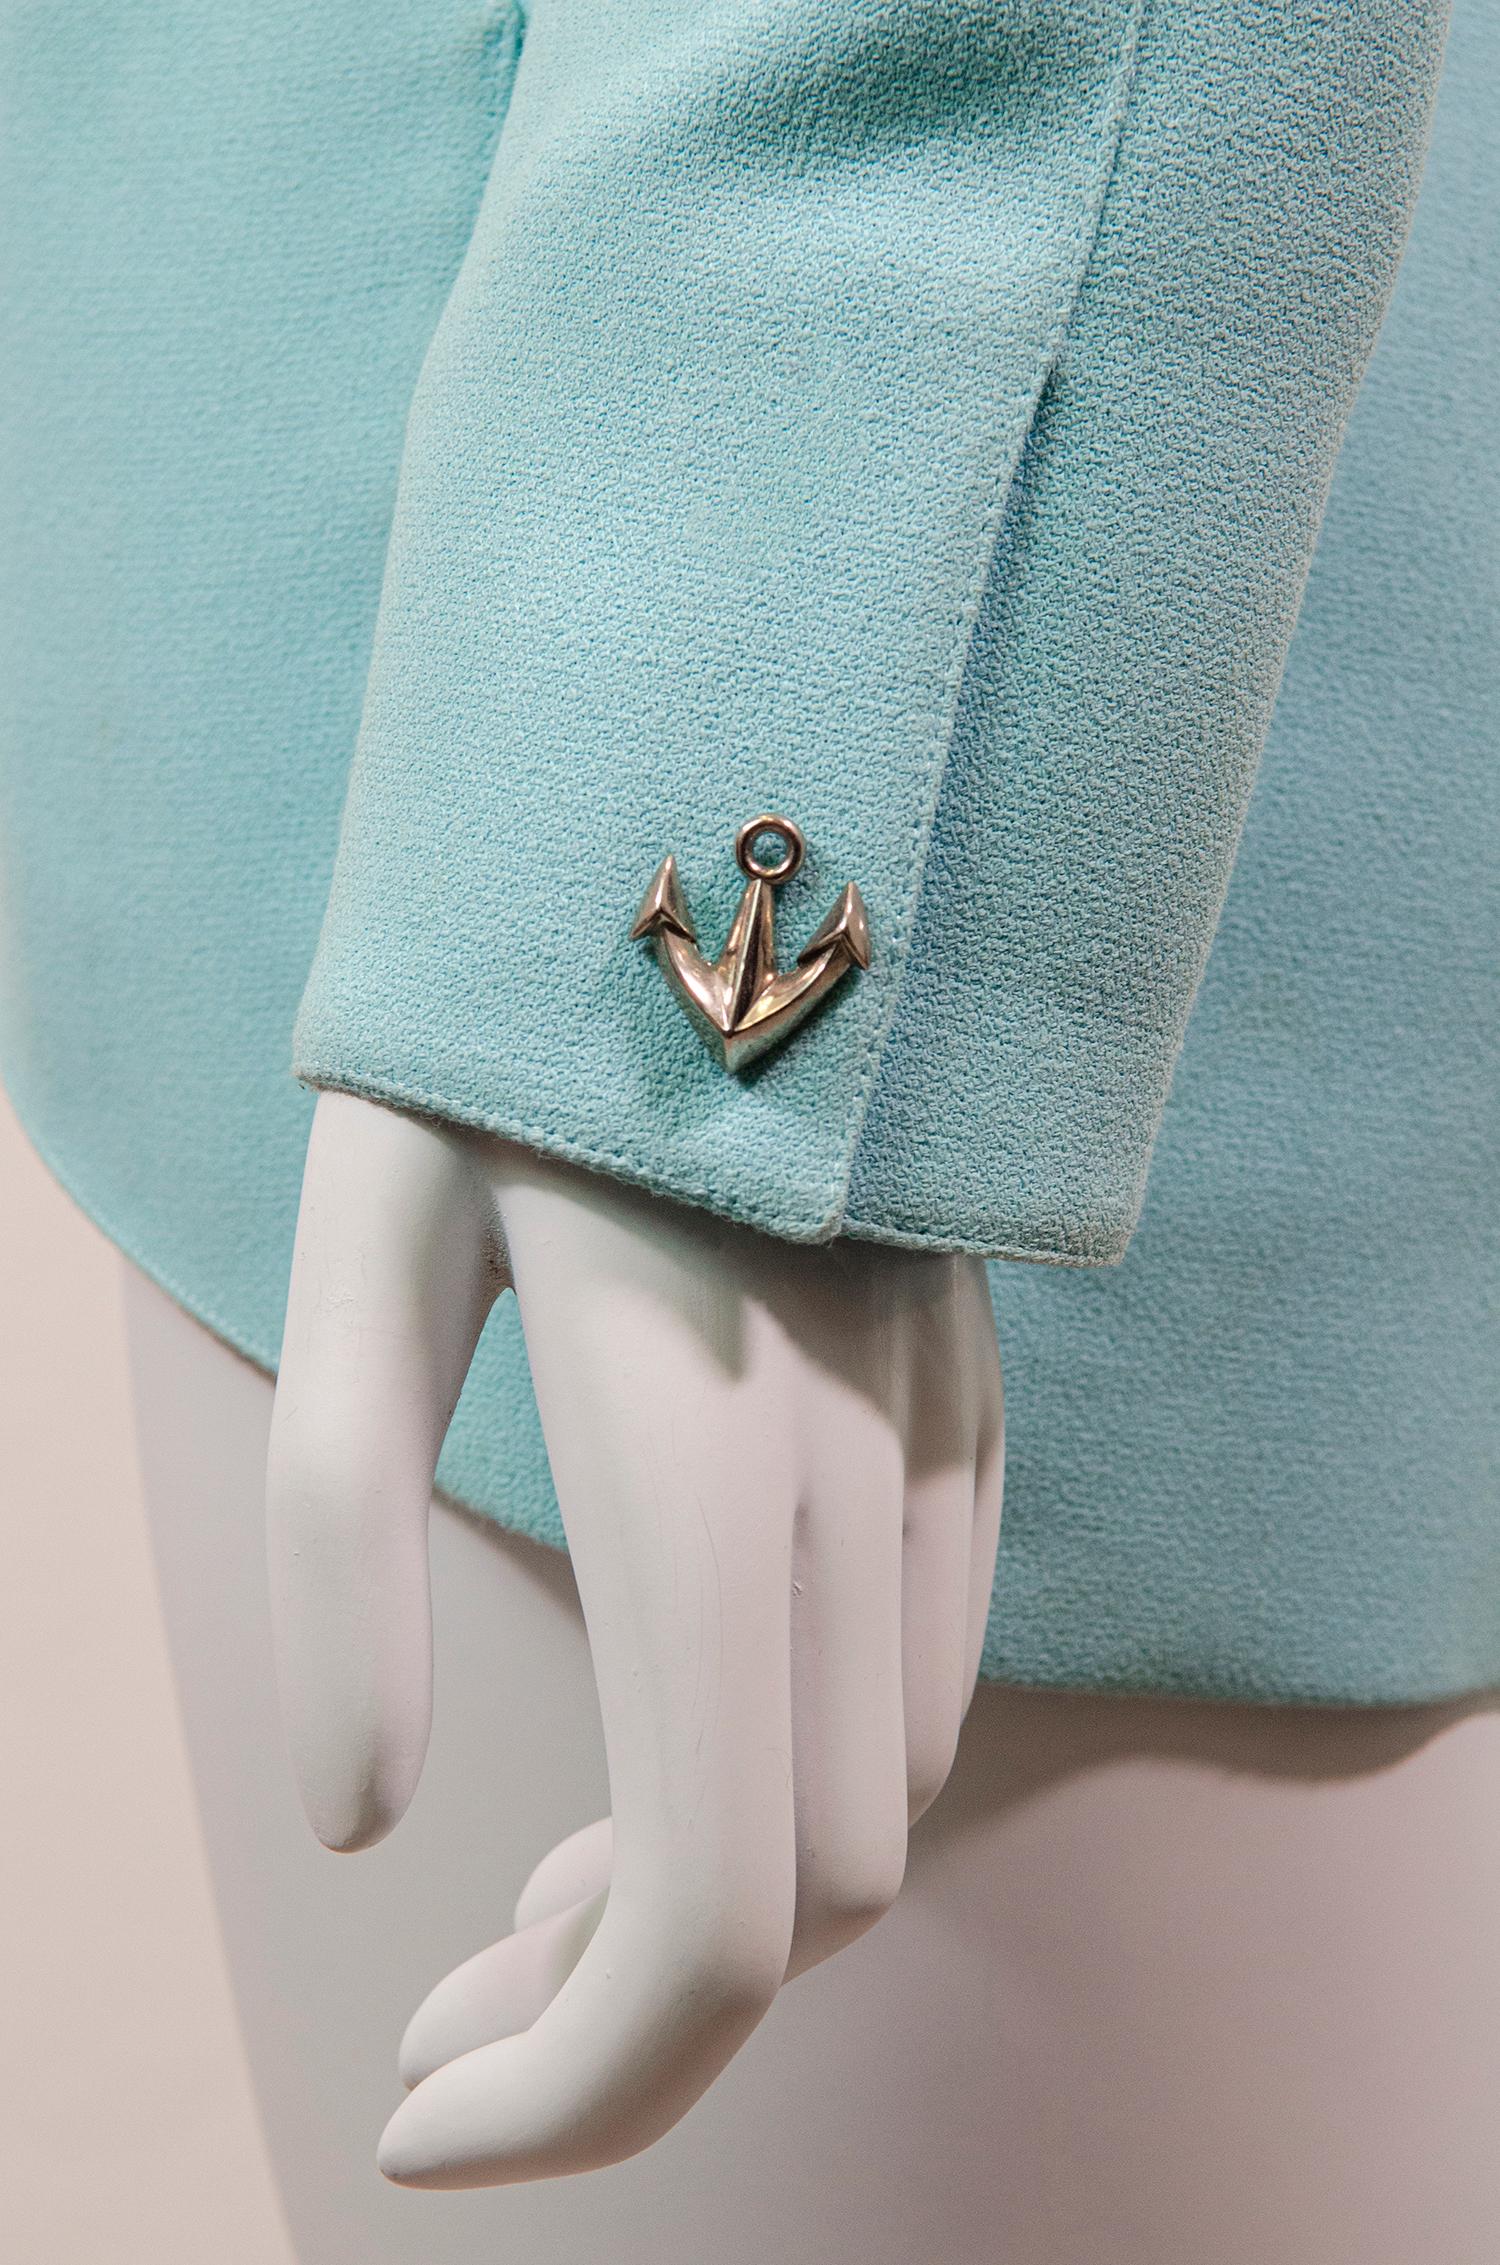 Thierry Mugler Vintage Pastel Blue Jacket with Anchors Nautical Aquatic 1